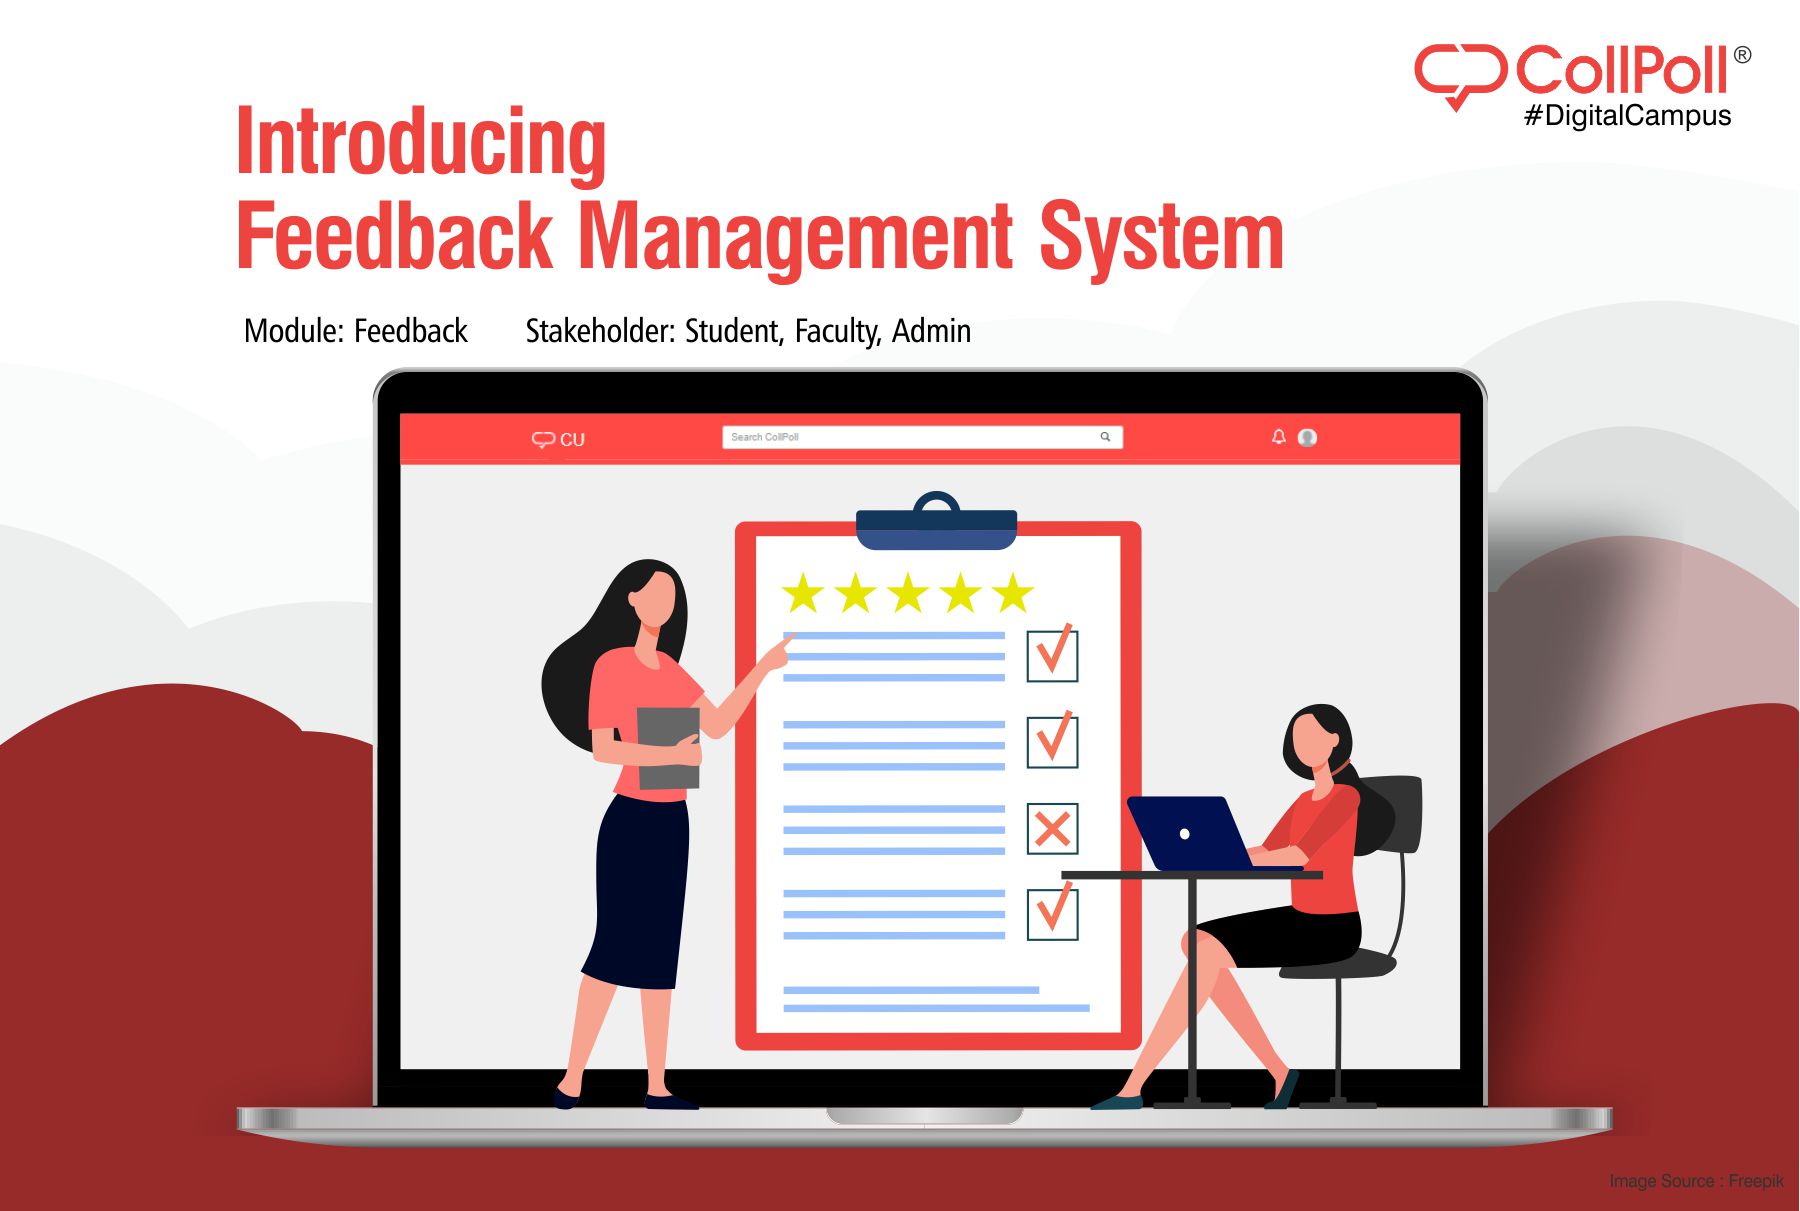 Introducing CollPoll’s Feedback Management System